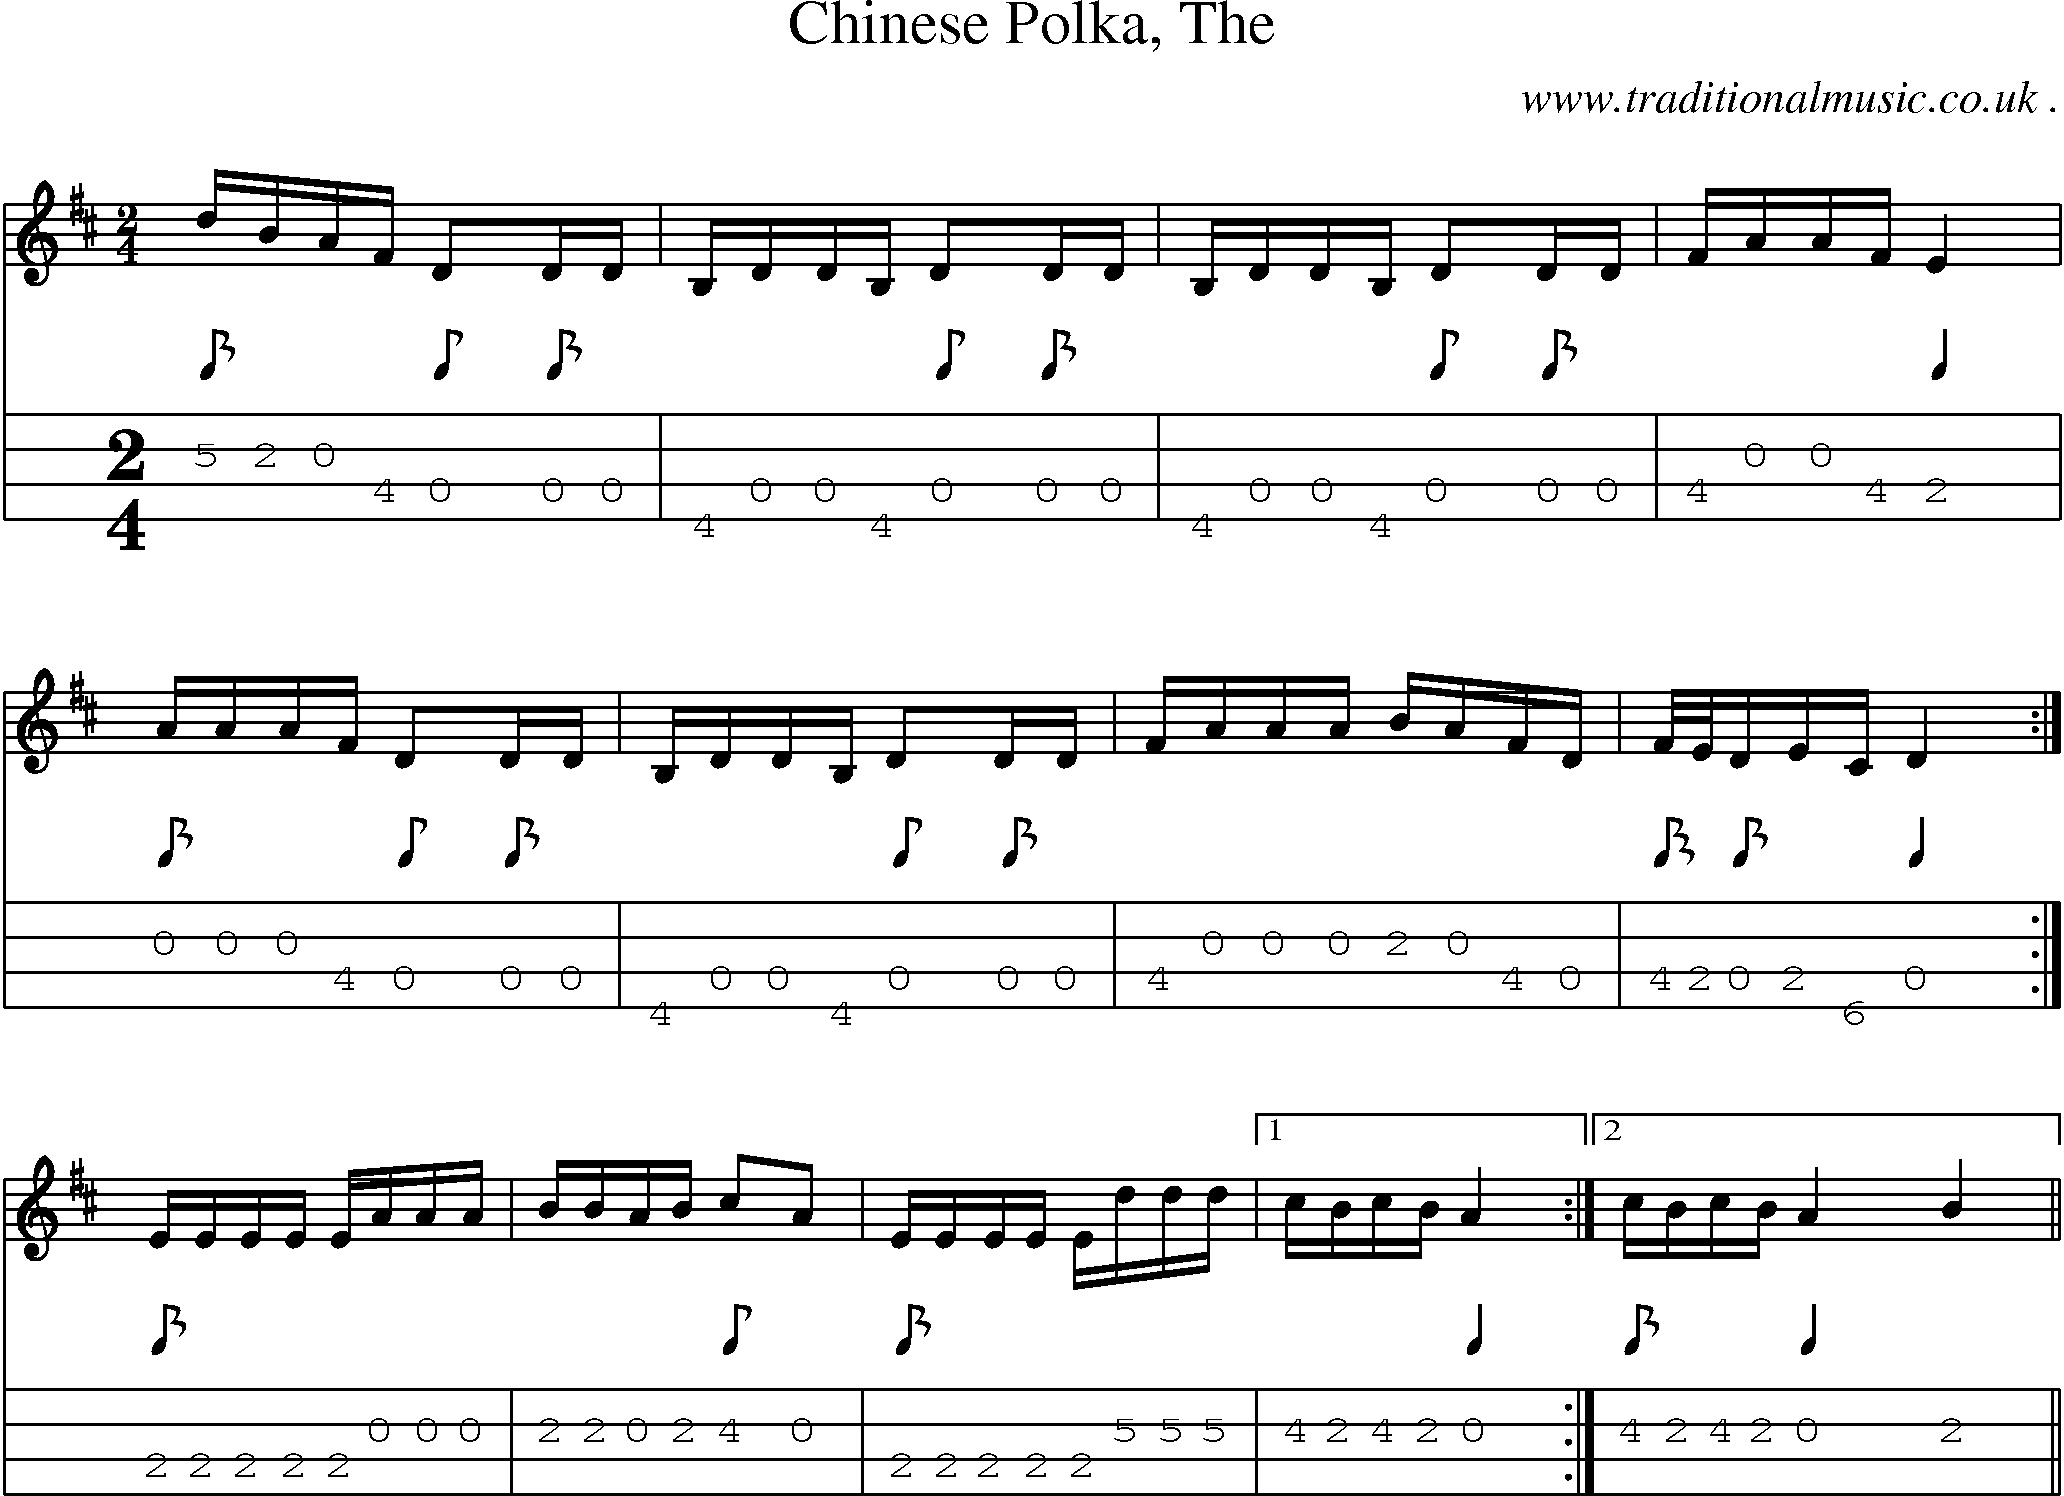 Music Score and Guitar Tabs for Chinese Polka The